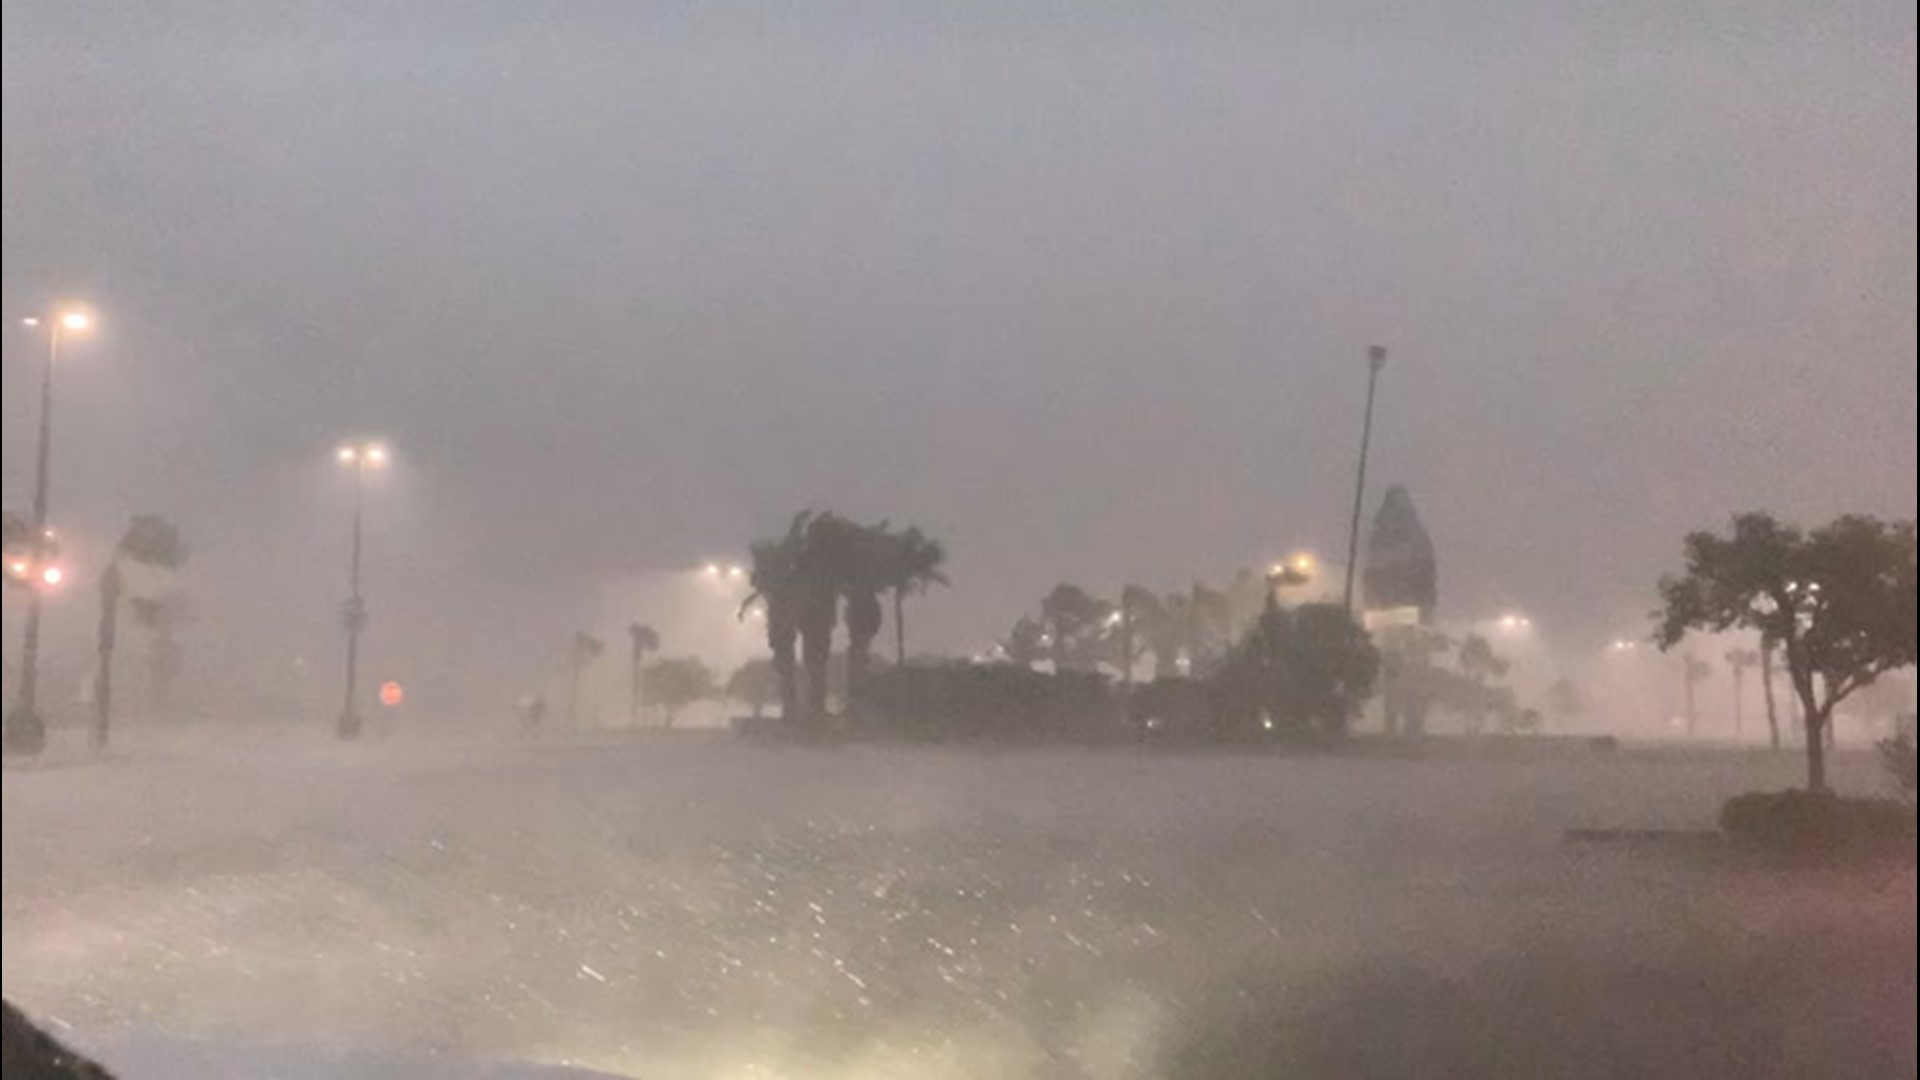 A nasty storm rolled through Kenner, Louisiana, the morning of April 15, near the New Orleans area. Loud thunder, heavy rain and wind can be heard.